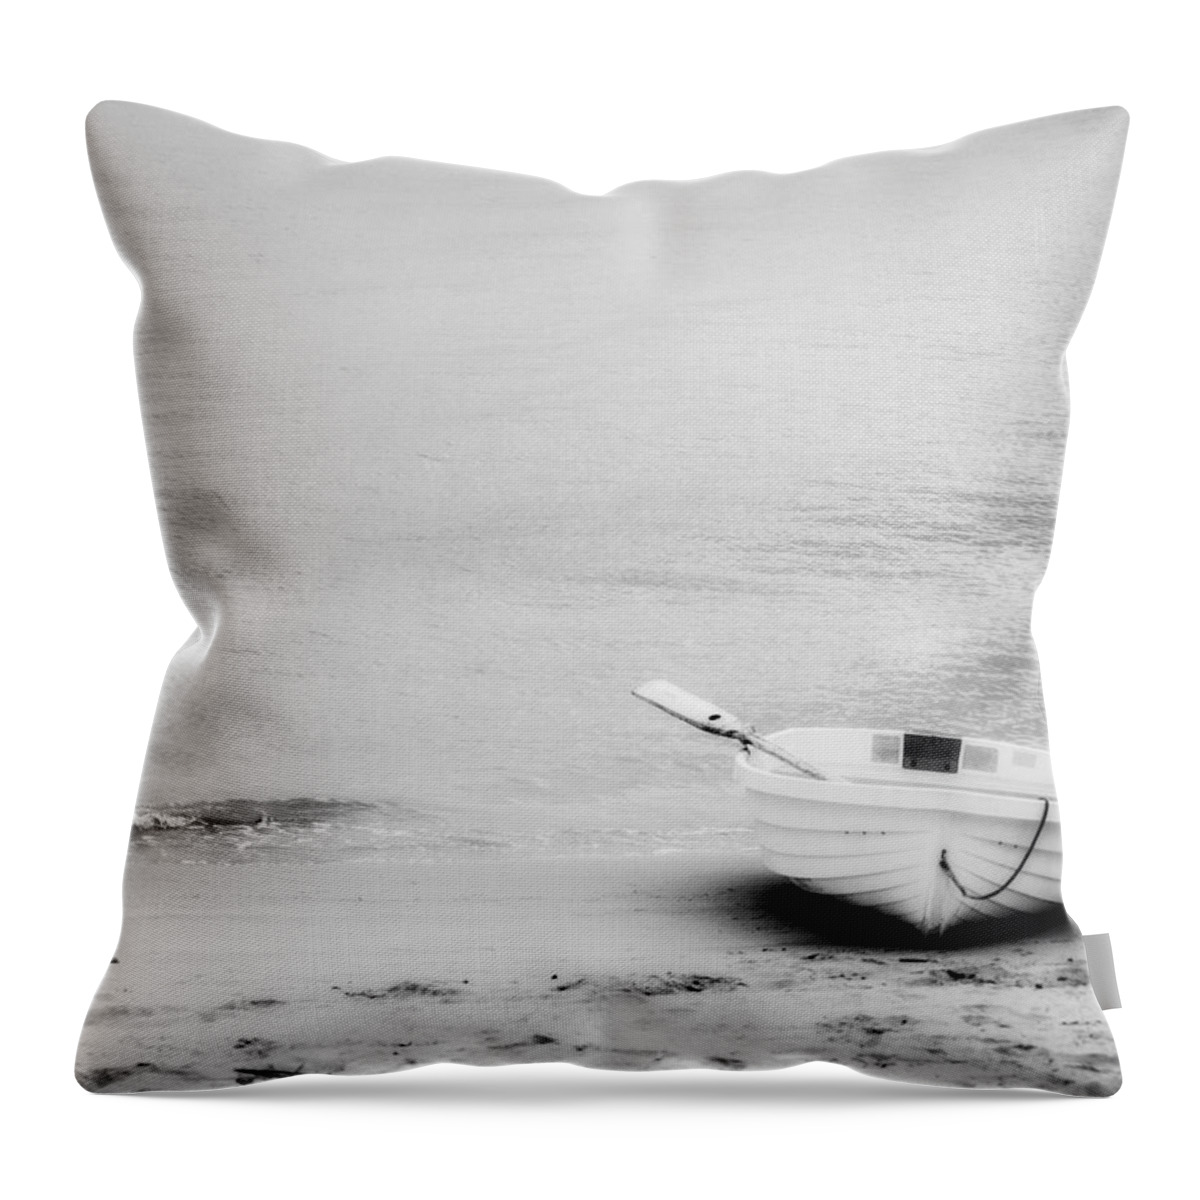 Boat Throw Pillow featuring the photograph Duo by Ryan Weddle